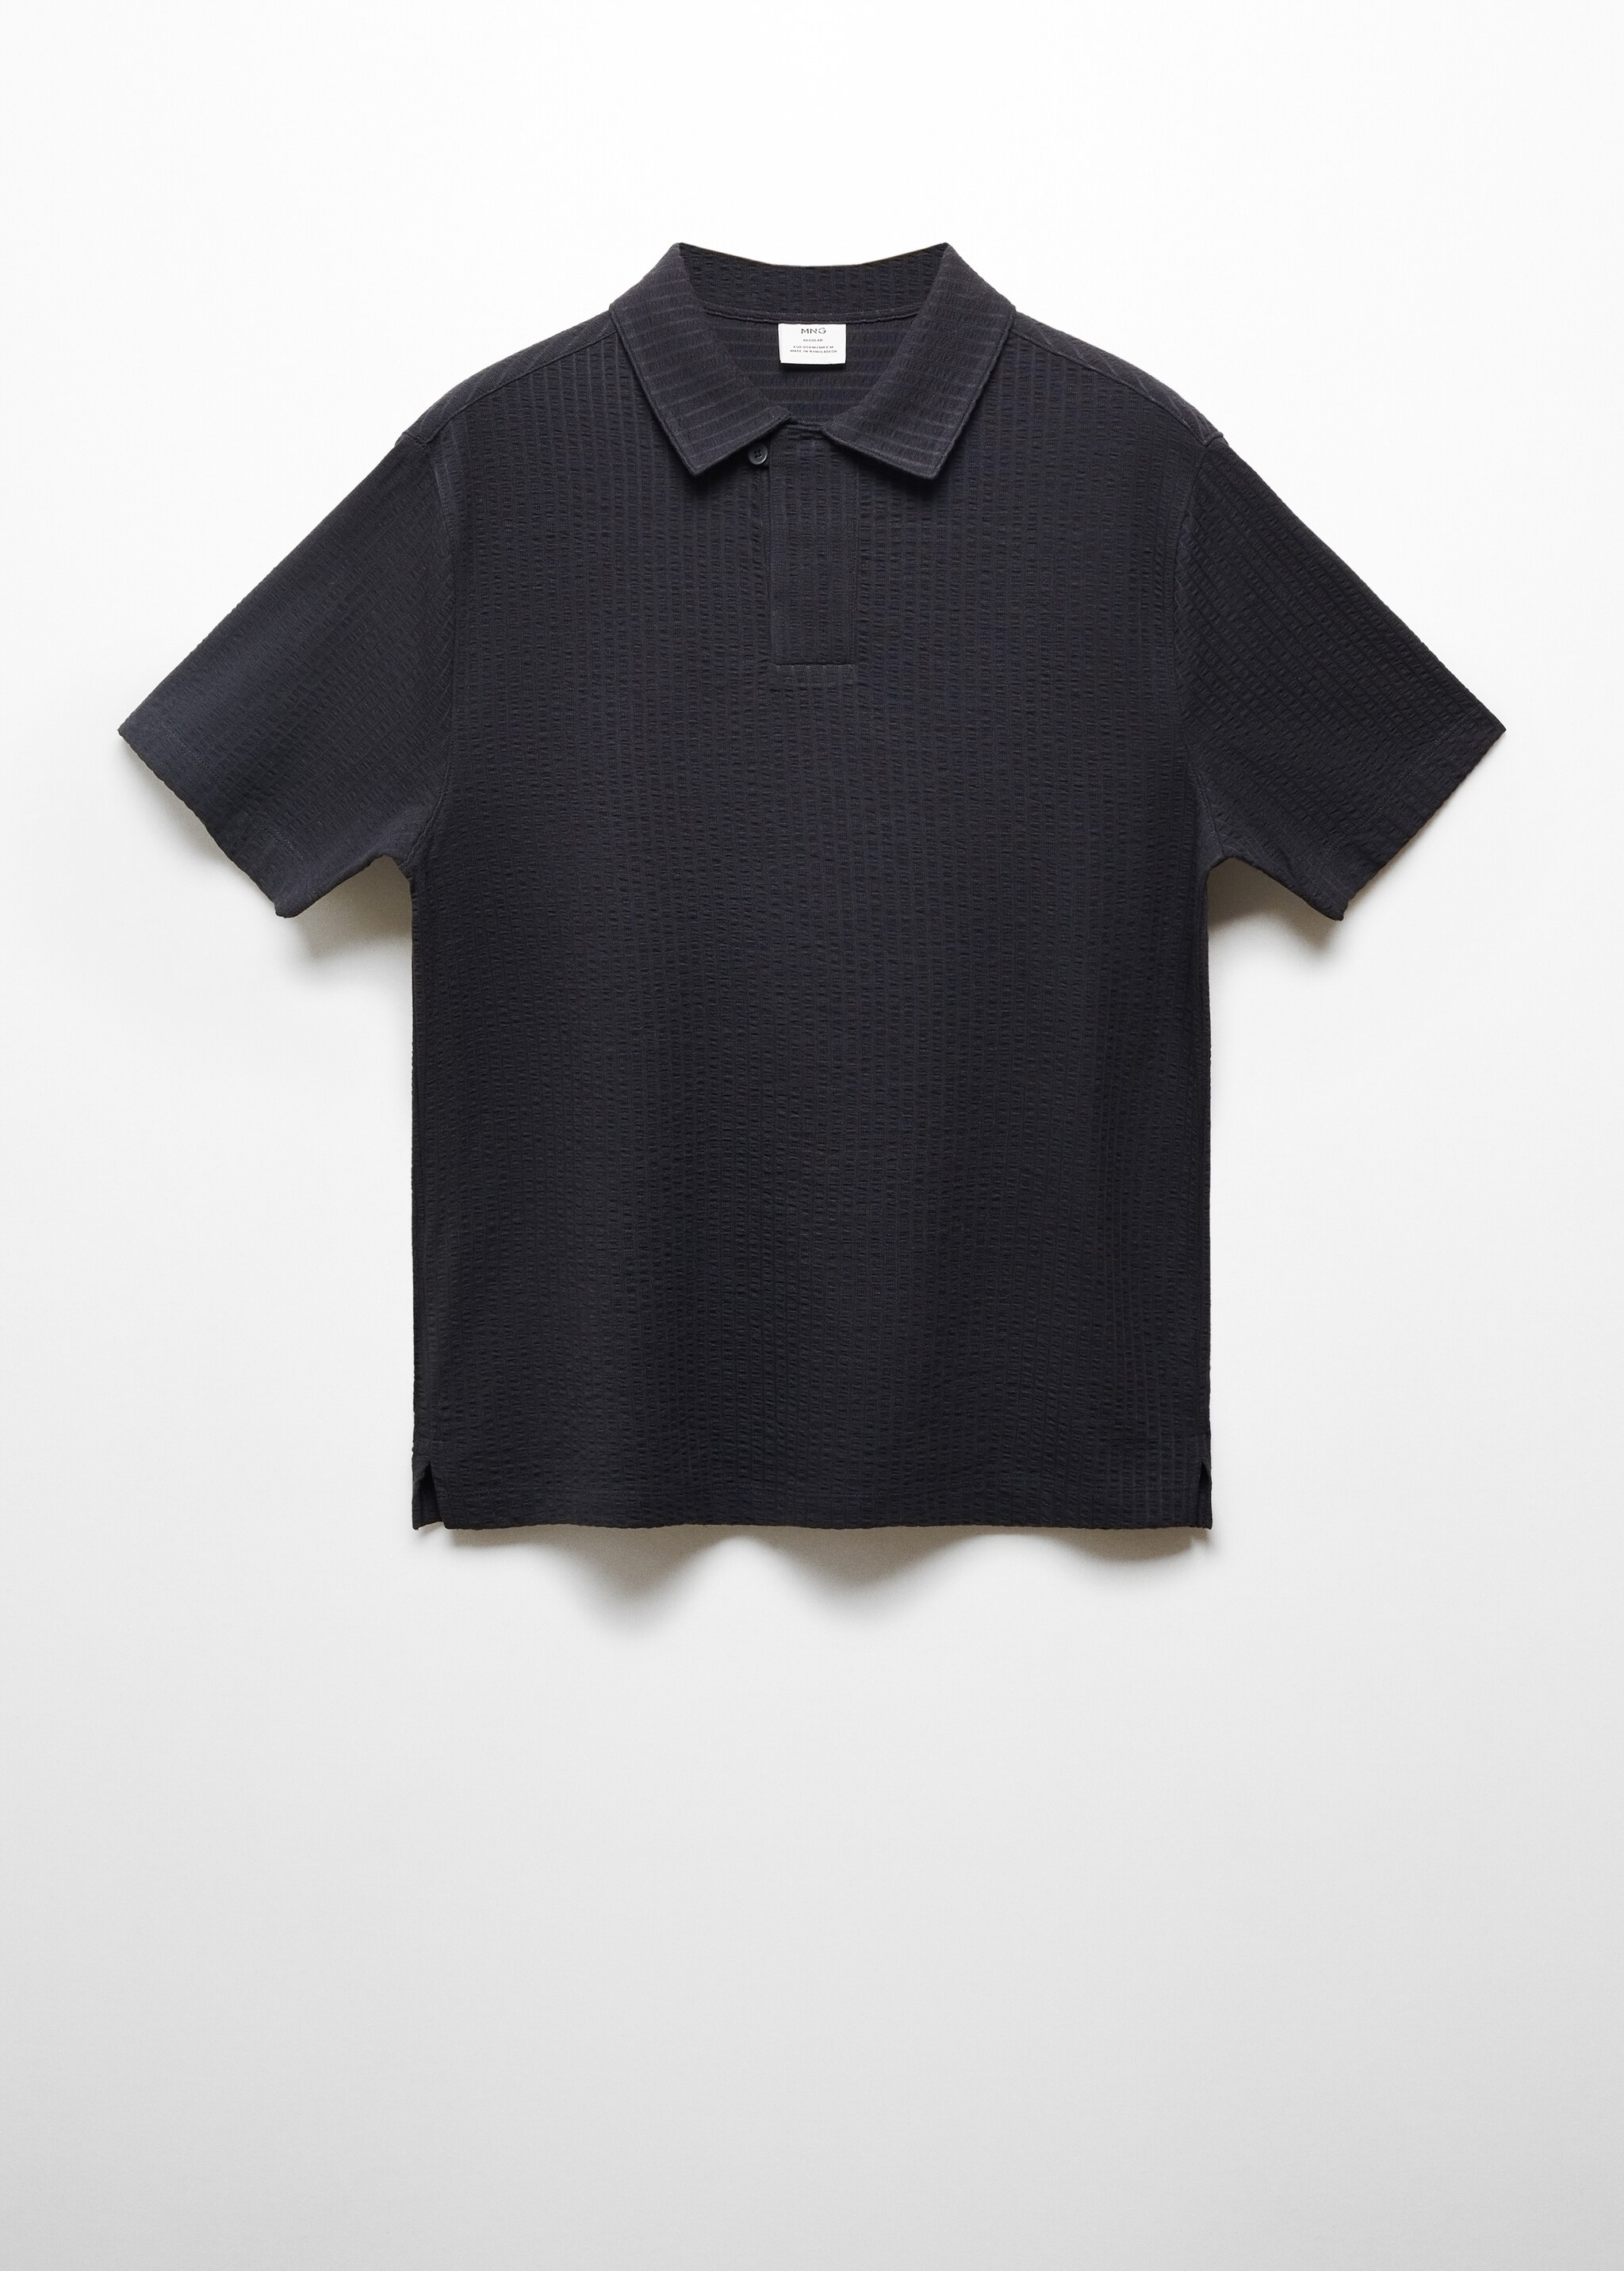 Seersucker cotton polo shirt - Article without model